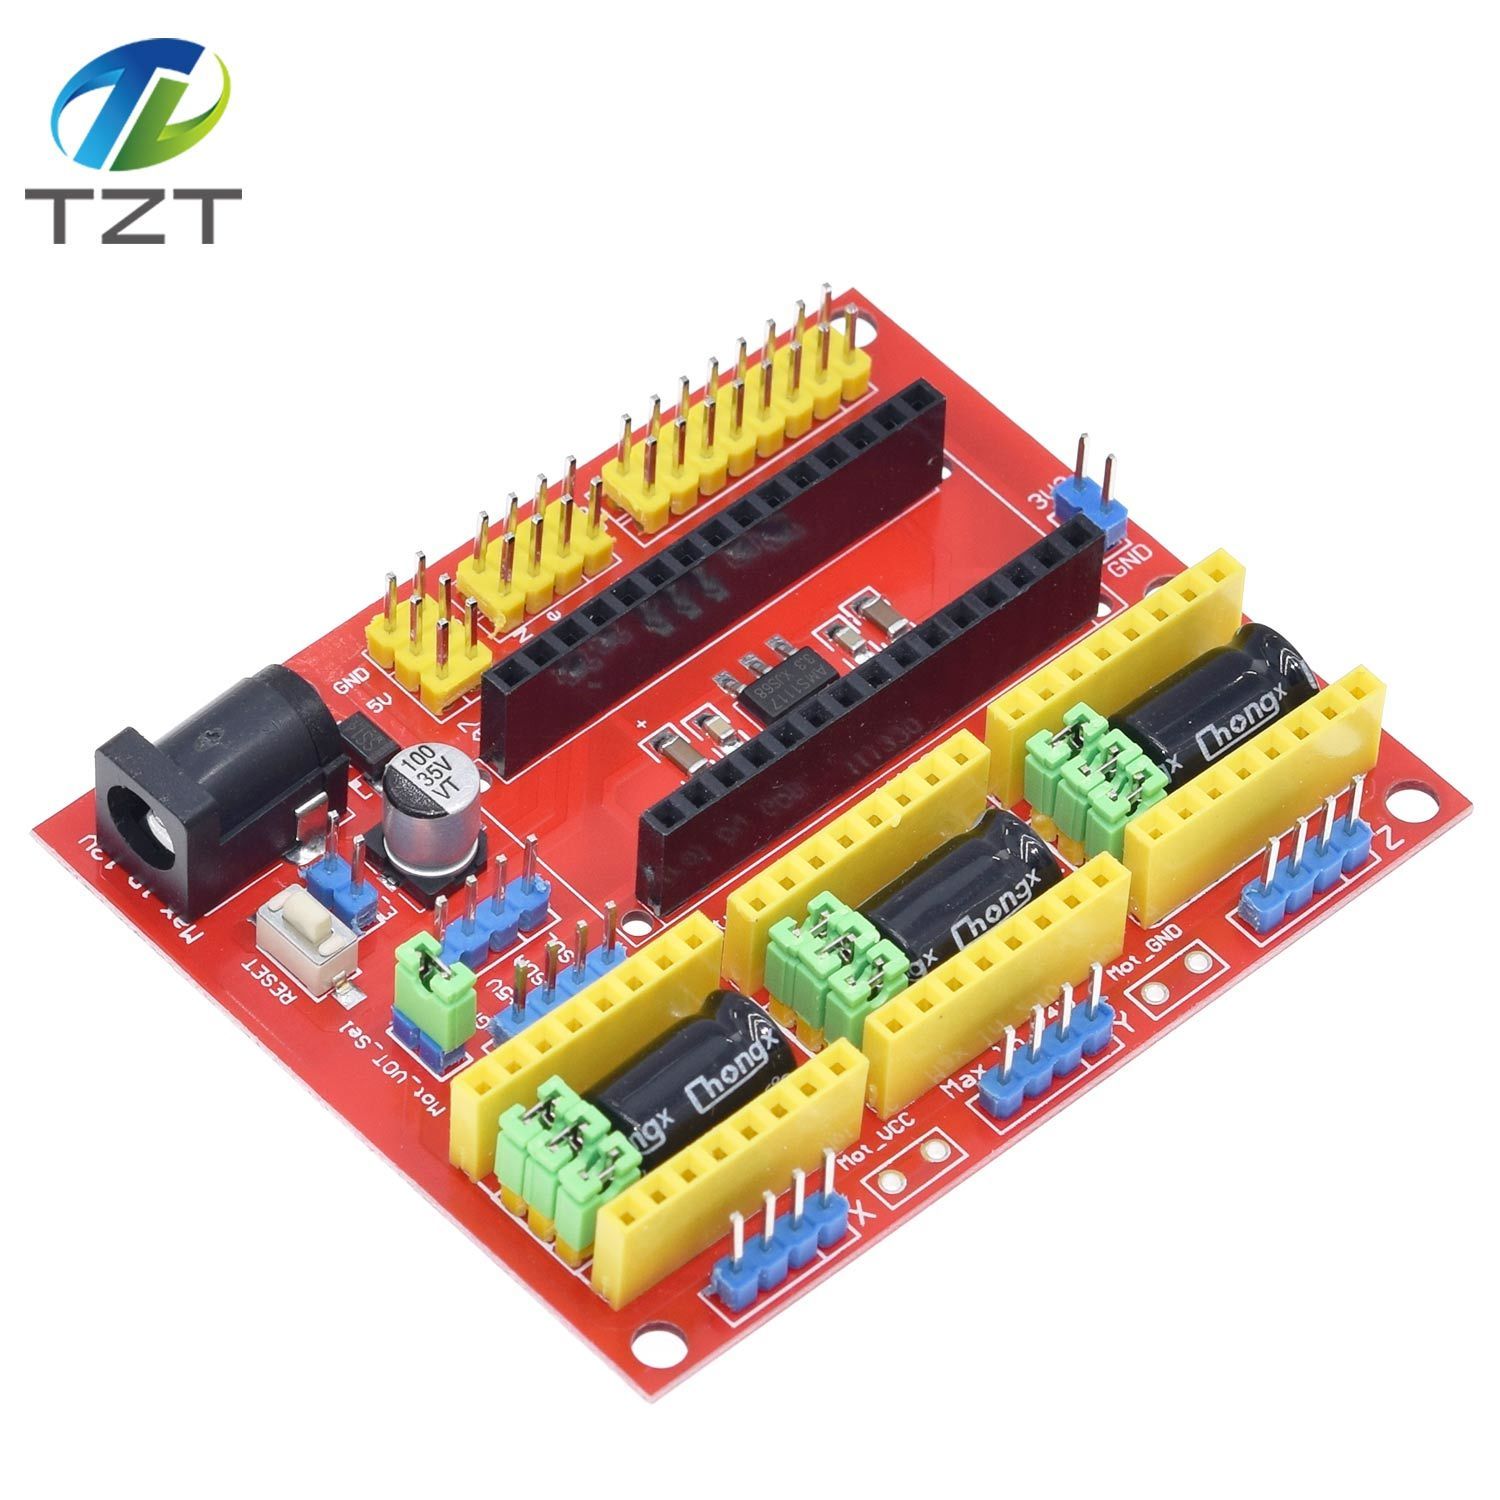 TZT New CNC Shield V4 Engraving Machine / 3D Printer / A4988 Driver Expansion Board for arduino Diy Kit